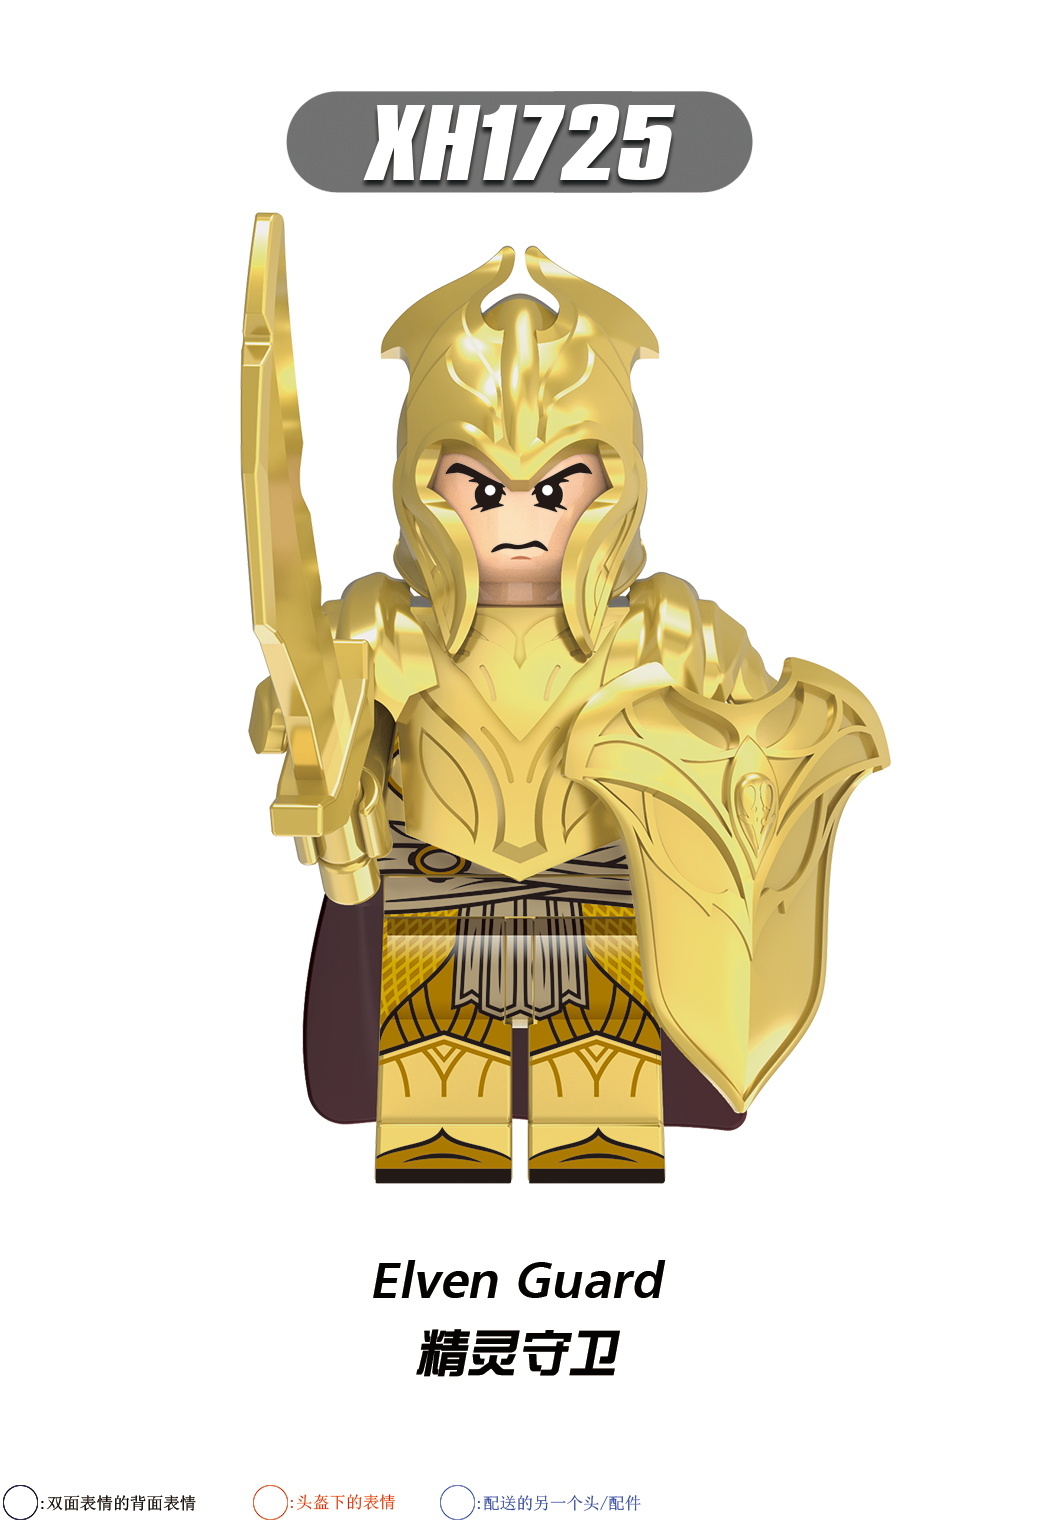 XH 1722 1723 1724 1725 1726 1727 1728 1729 X0315 Elven Guard Warrior Archer Movie Series Characters Bricks Building Blocks Heroes Action Figures Educational Toys For Children's Gifts